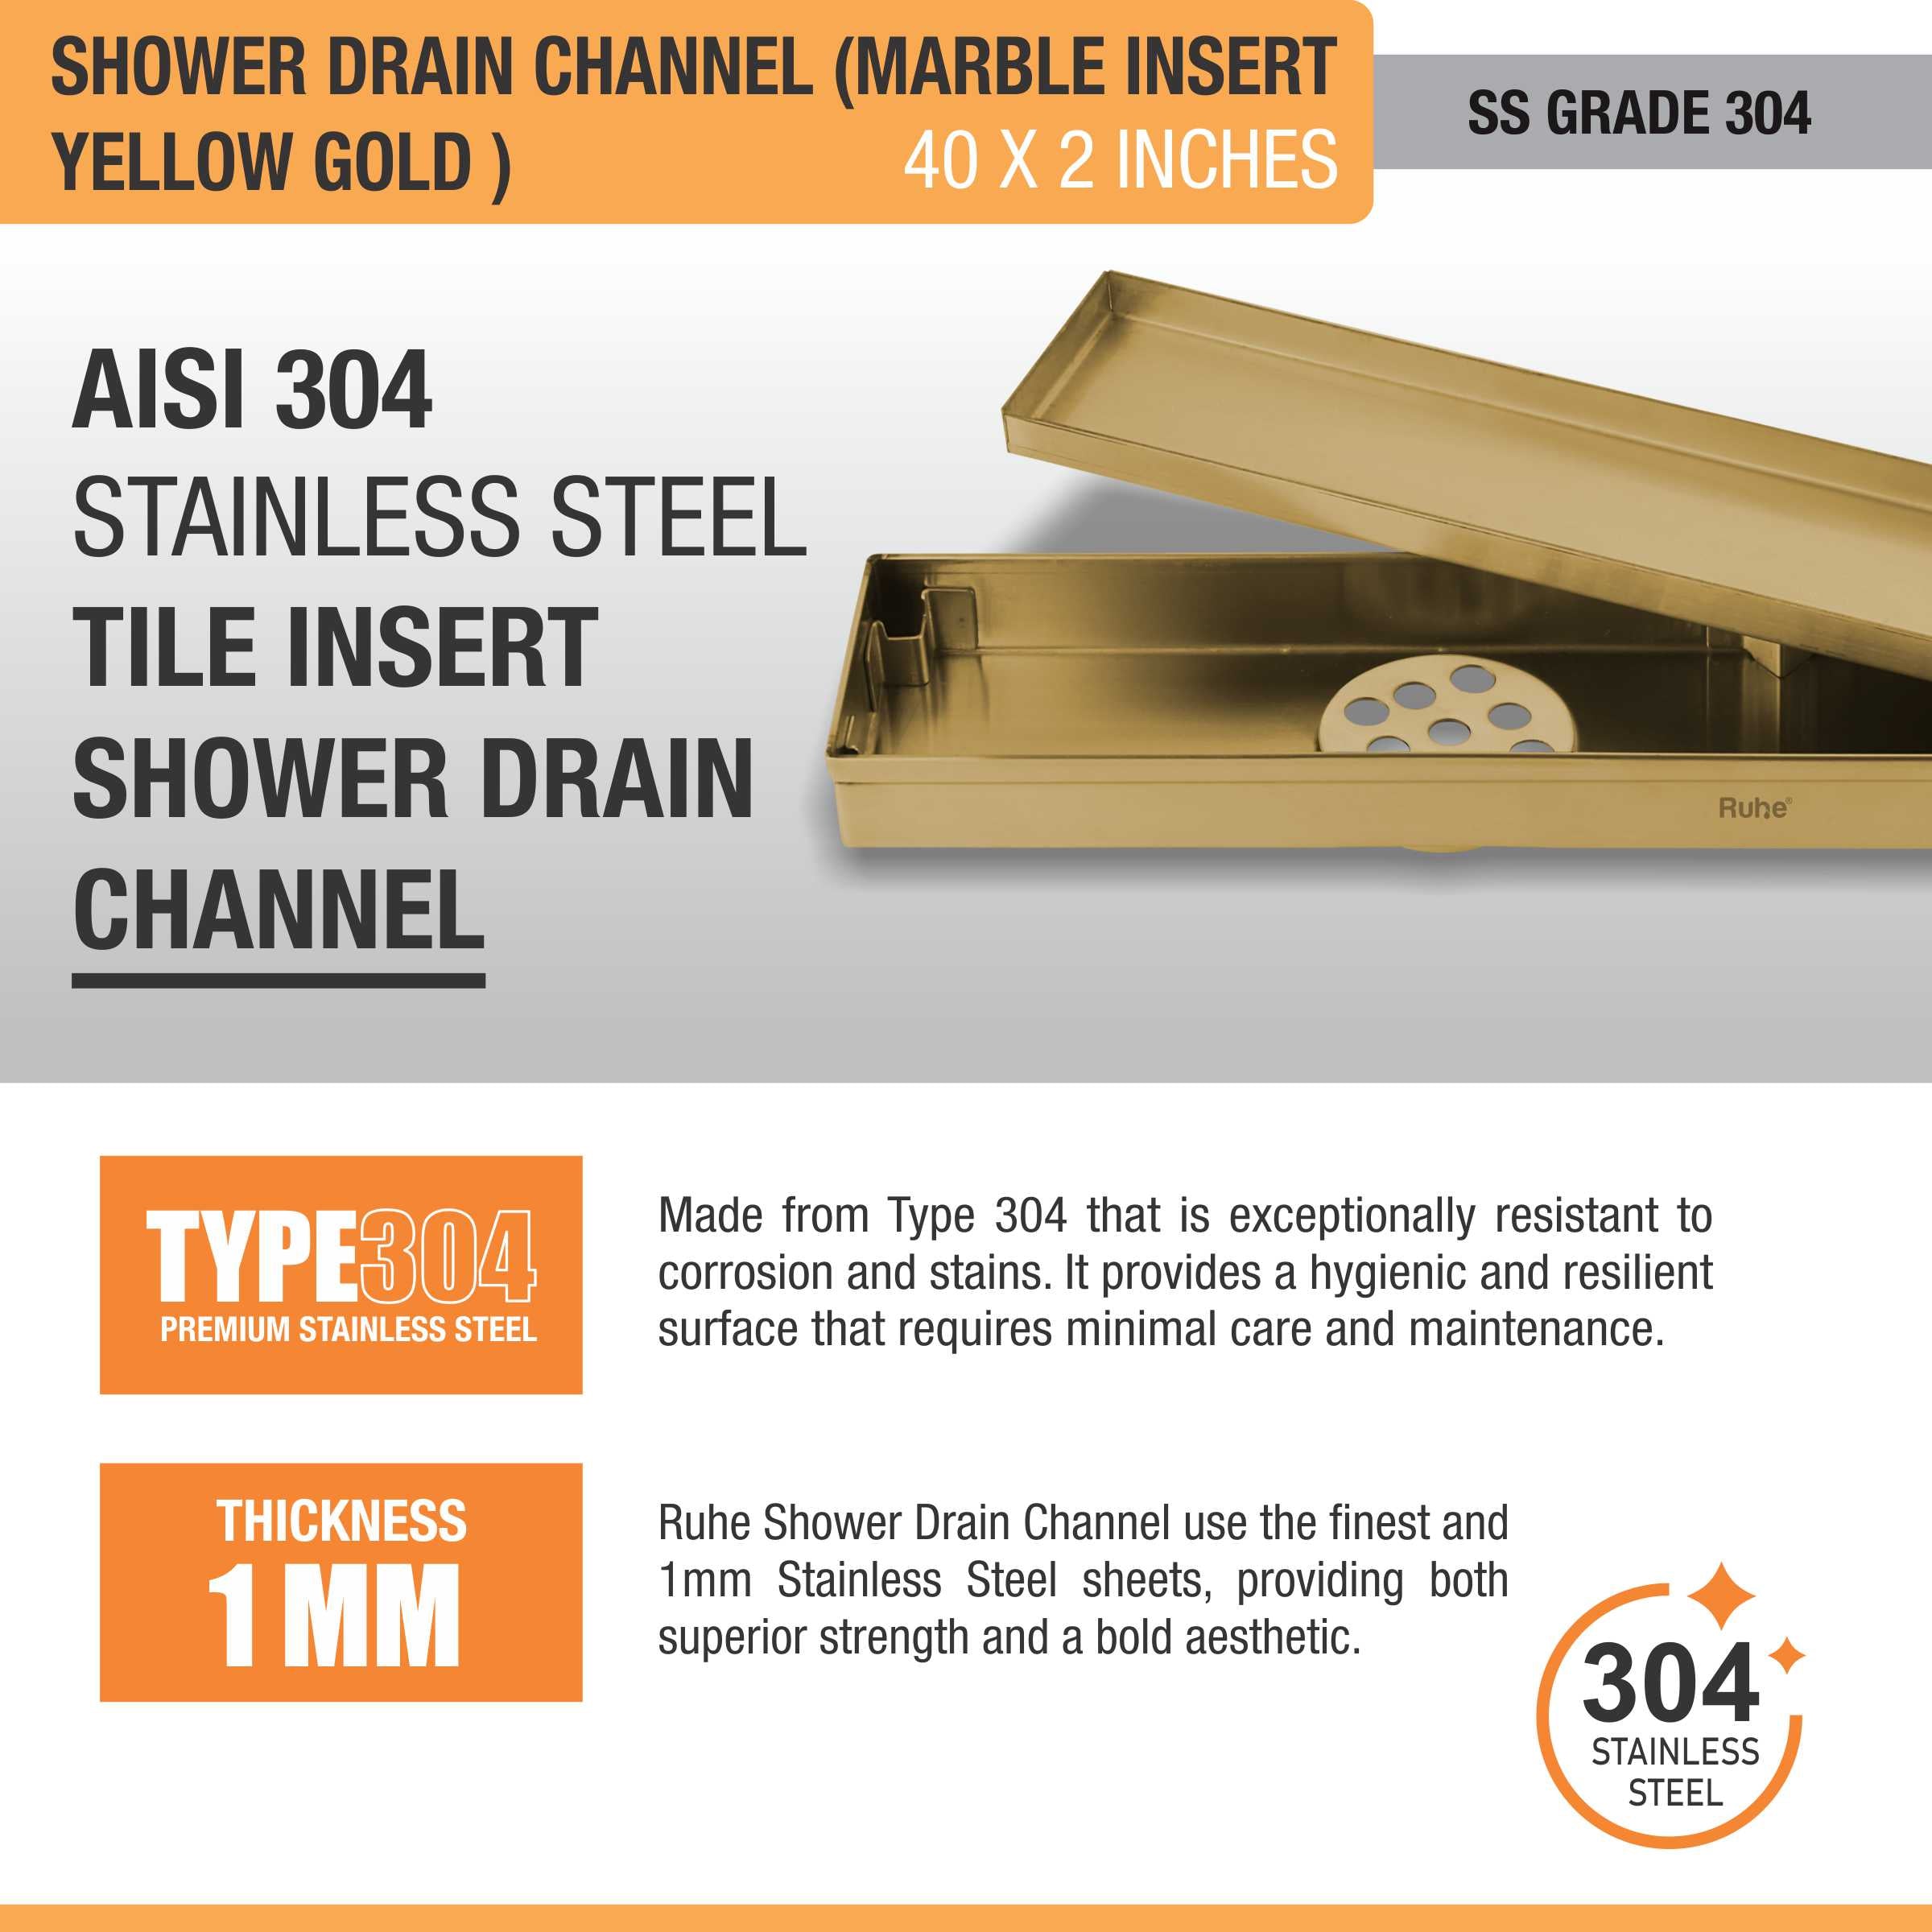 Marble Insert Shower Drain Channel (40 x 2 Inches) YELLOW GOLD stainless steel